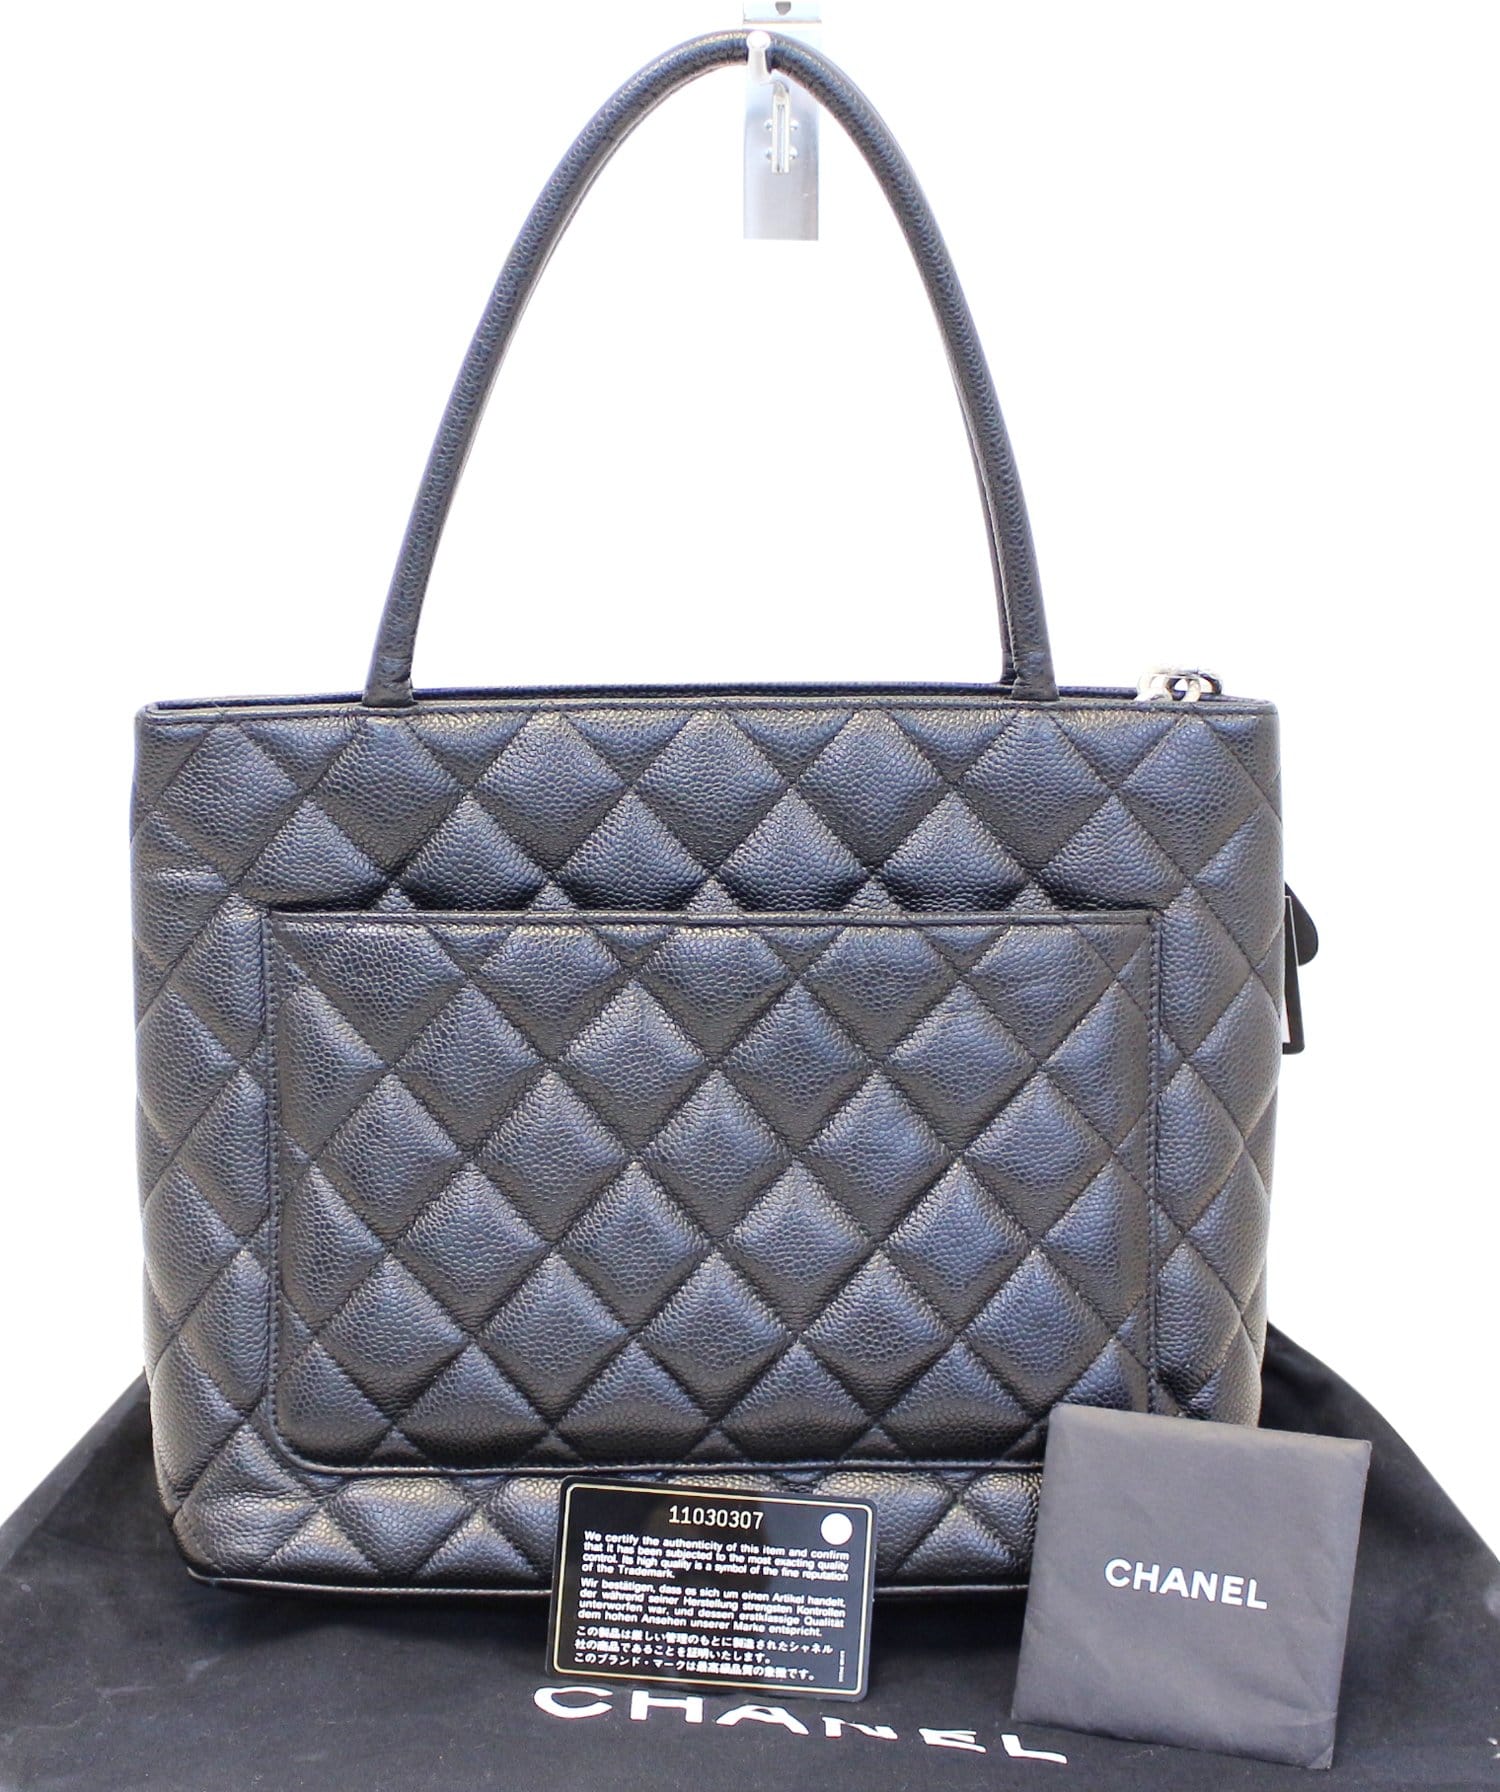 chanel tote bag black leather